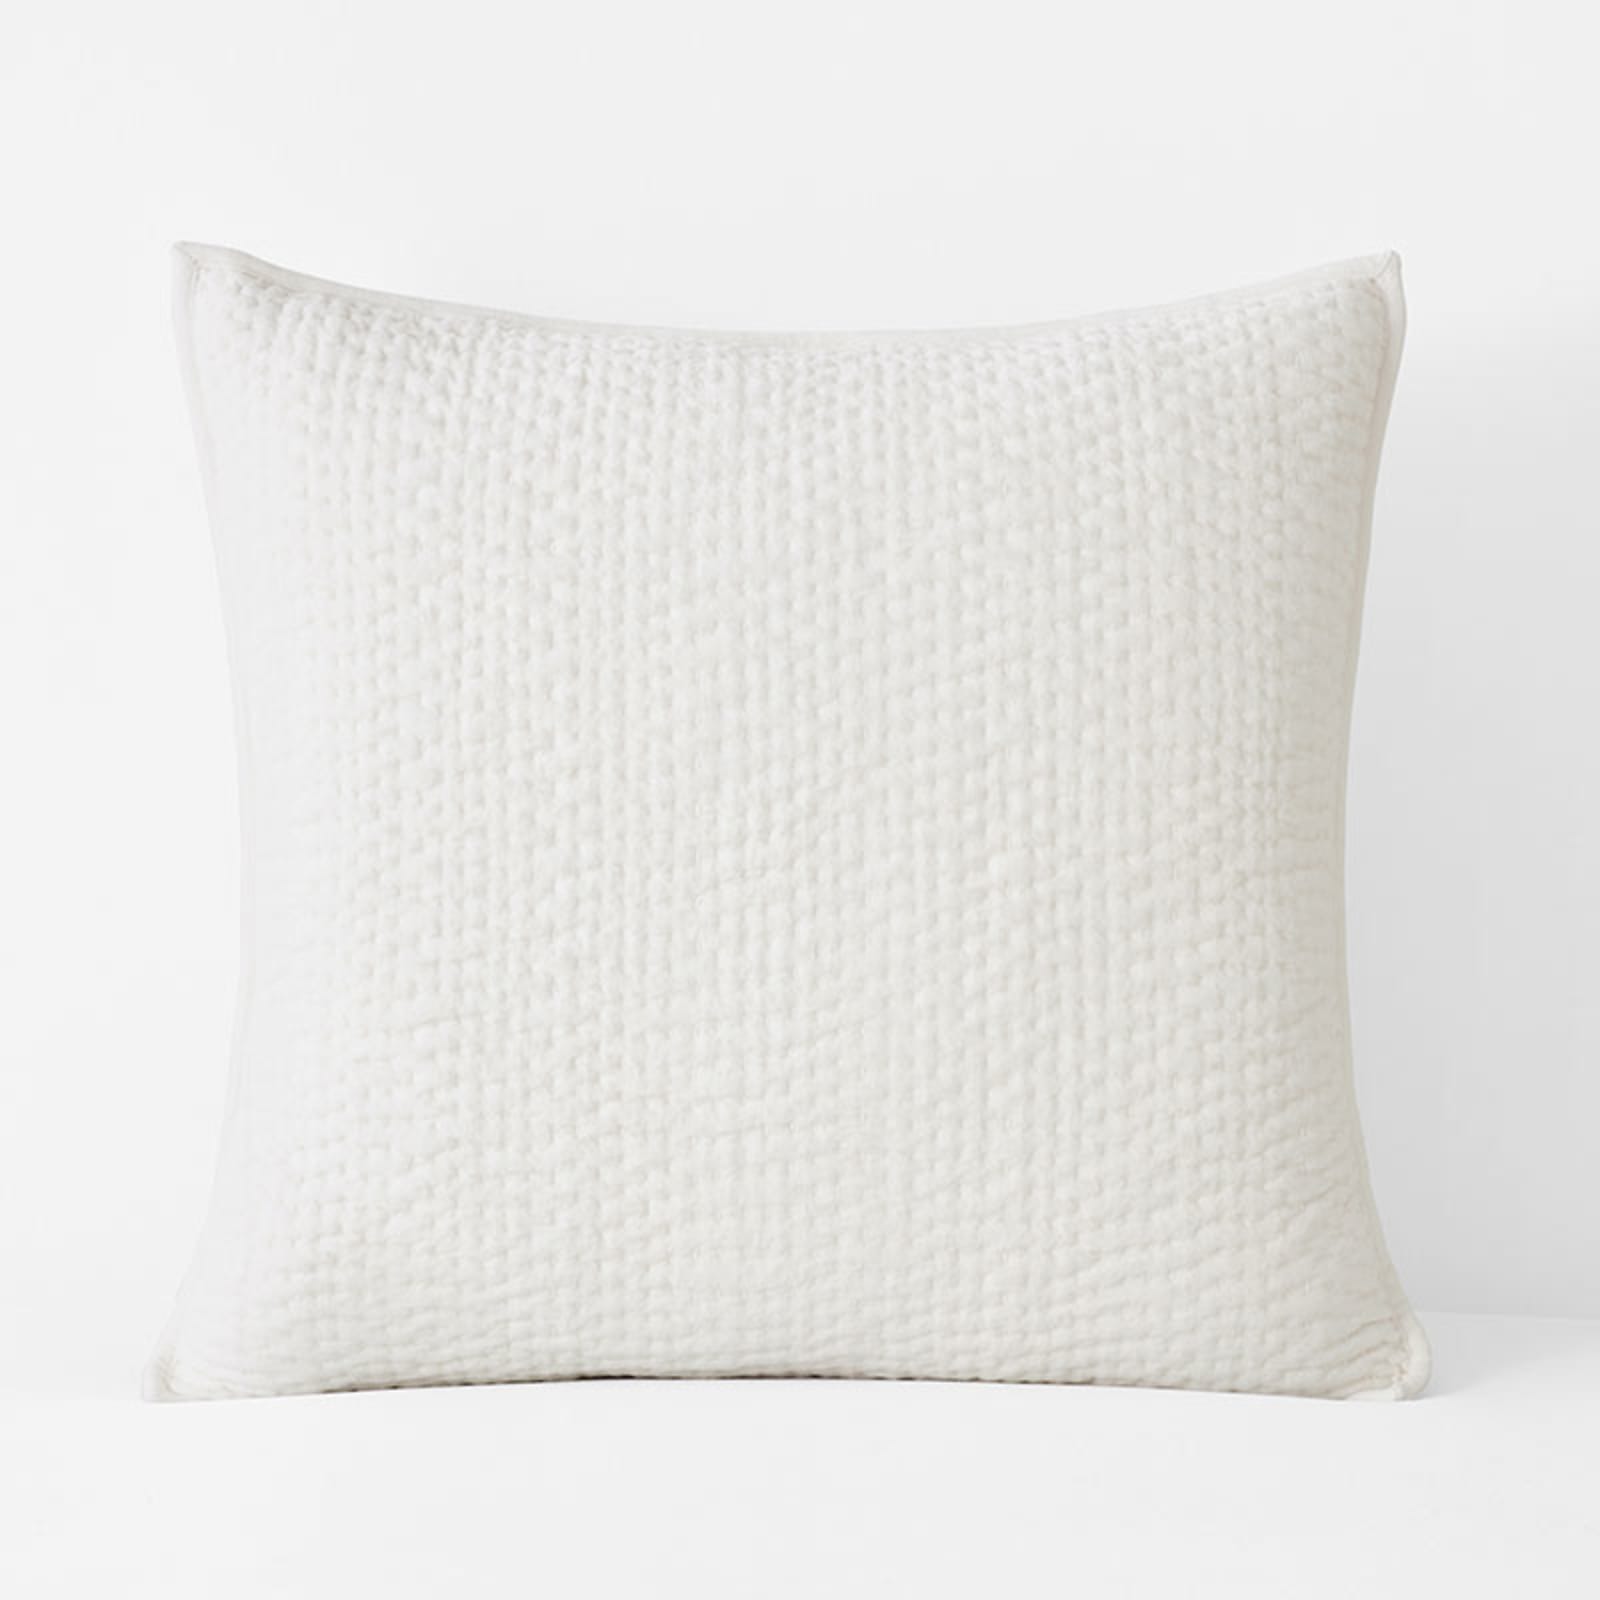 Ophelia Handcrafted Quilted Sham - White, Euro | The Company Store